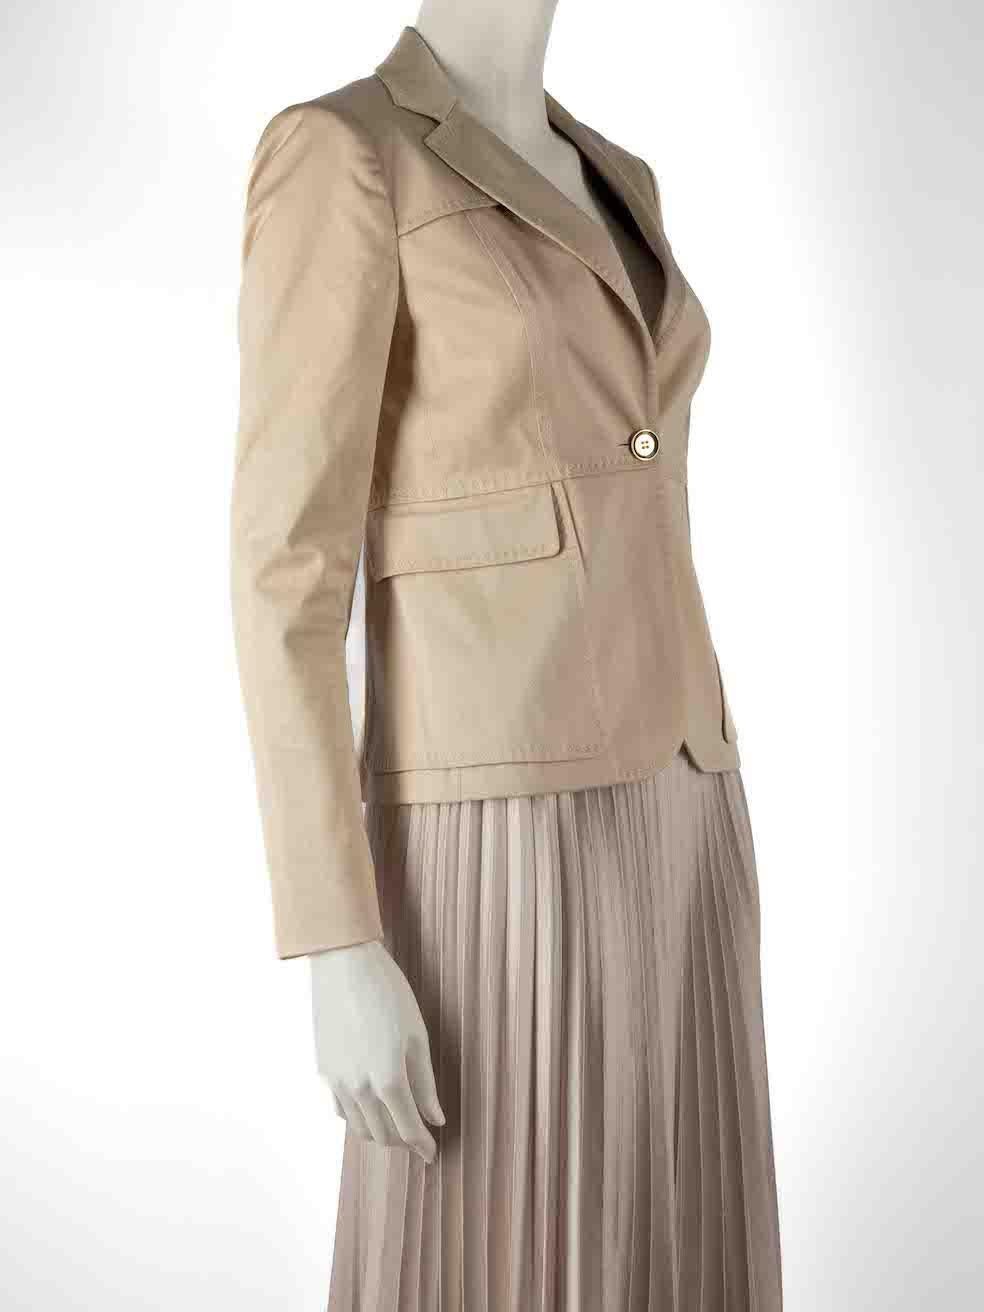 CONDITION is Very good. Minimal wear to blazer is evident. Minimal wear to the front with small marks on this used Gucci designer resale item.
 
 
 
 Details
 
 
 Beige
 
 Cotton
 
 Blazer
 
 Single breasted
 
 2x Front side pockets with flaps
 
